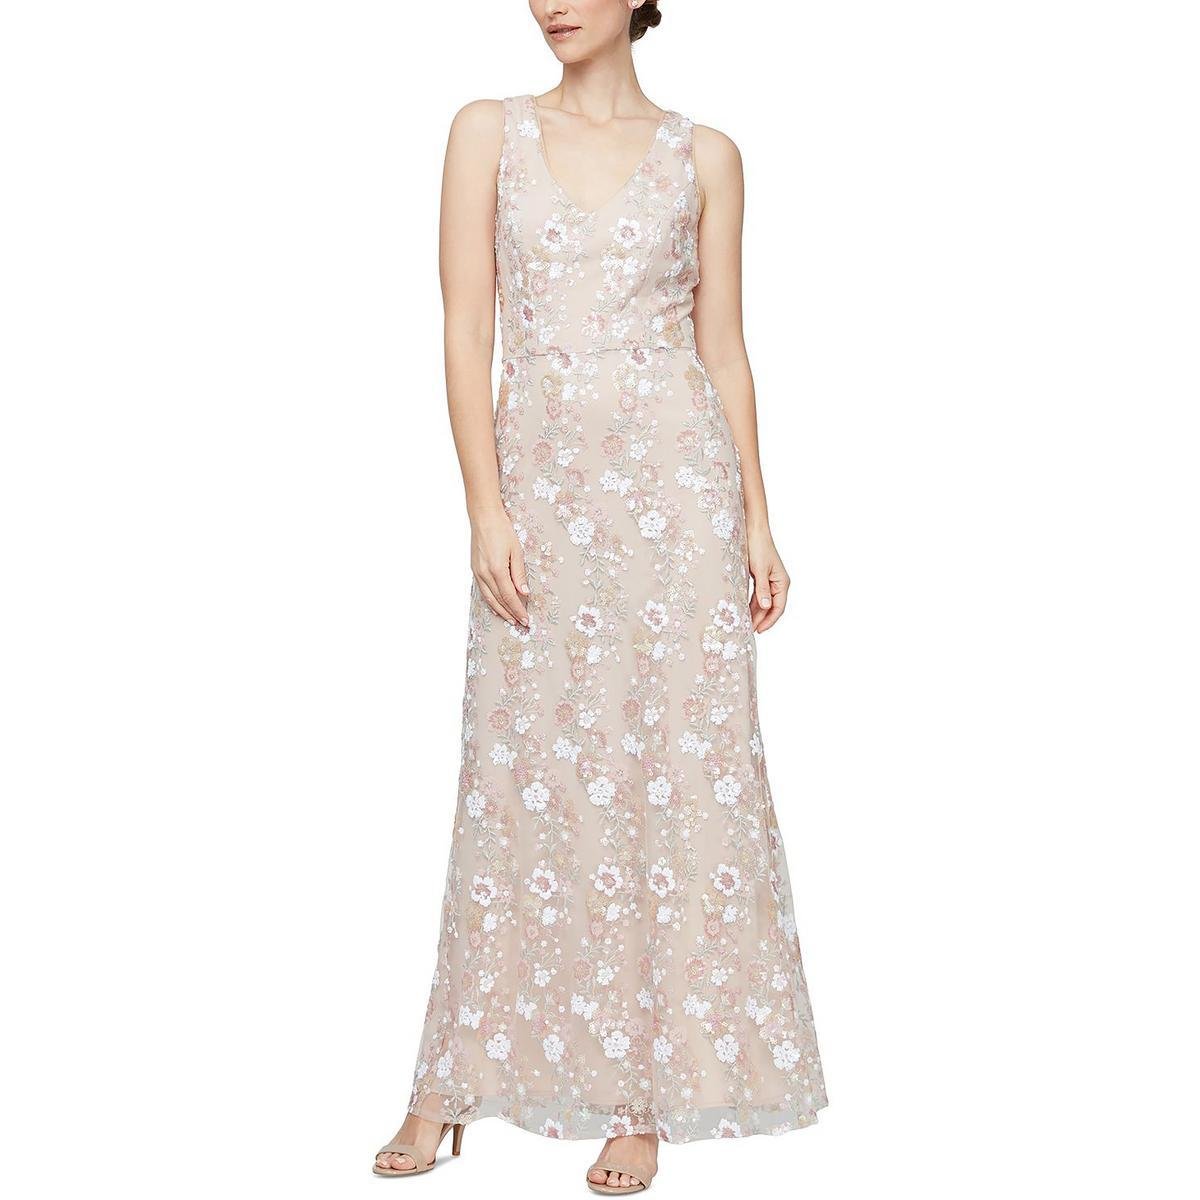 Alex &amp; Eve Womens Floral Sequined Evening Dress by ALEX&AMP; EVE